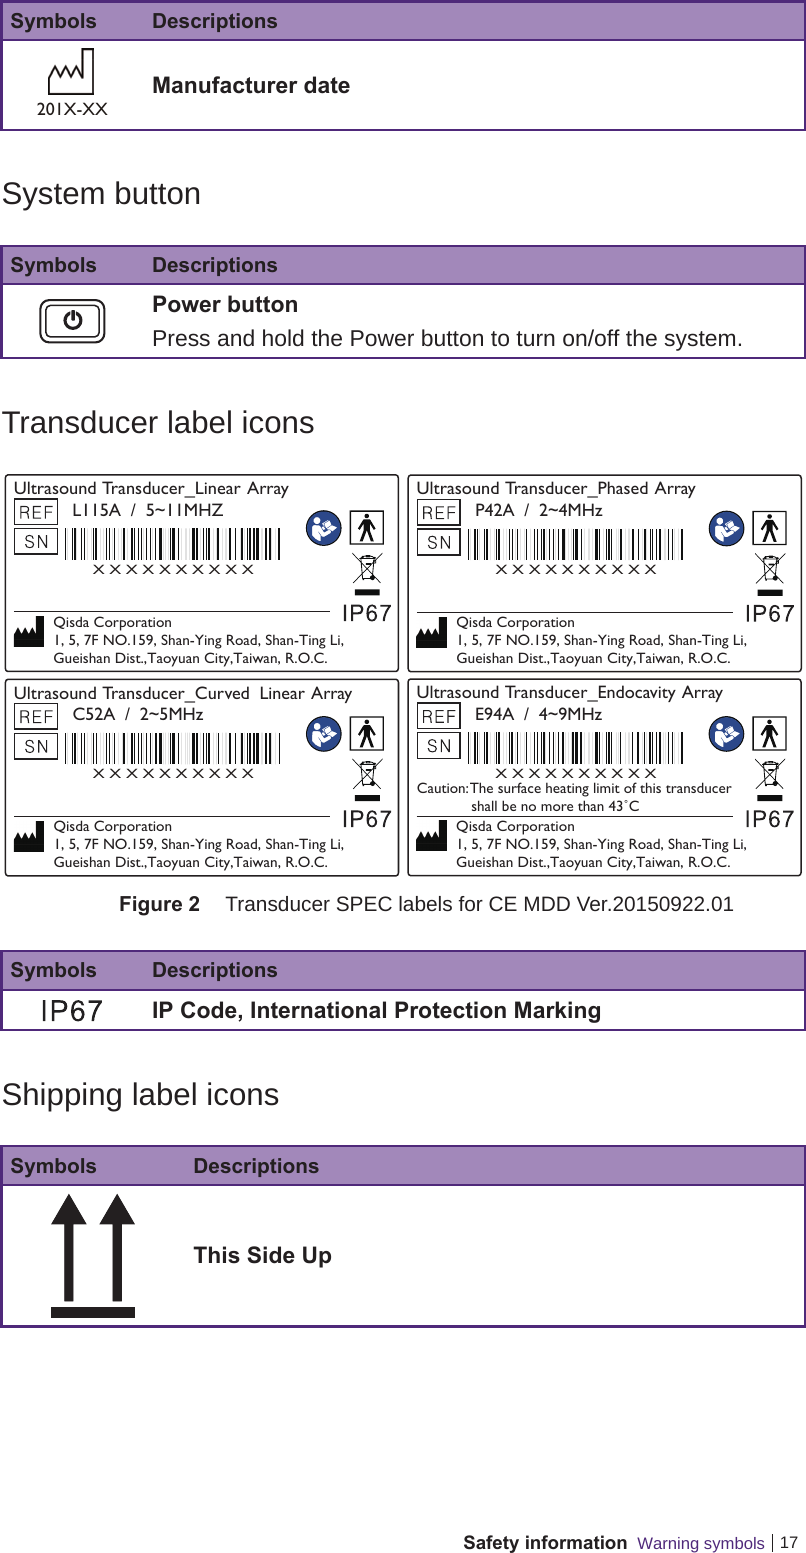 17Safety information  Warning symbolsSymbols Descriptions201X-XXManufacturer dateSystem buttonSymbols DescriptionsPower buttonPress and hold the Power button to turn on/off the system.Transducer label iconsUltrasound Transducer_Linear Array        L115A / 5~11MHZQisda Corporation1, 5, 7F NO.159, Shan-Ying Road, Shan-Ting Li,Gueishan Dist.,Taoyuan City,Taiwan, R.O.C.X X X X X X X X X X Ultrasound Transducer_Phased Array        P42A / 2~4MHzQisda Corporation1, 5, 7F NO.159, Shan-Ying Road, Shan-Ting Li,Gueishan Dist.,Taoyuan City,Taiwan, R.O.C.X X X X X X X X X XUltrasound Transducer_Curved  Linear Array        C52A / 2~5MHzQisda Corporation1, 5, 7F NO.159, Shan-Ying Road, Shan-Ting Li,Gueishan Dist.,Taoyuan City,Taiwan, R.O.C.X X X X X X X X X X Ultrasound Transducer_Endocavity Array       E94A / 4~9MHzCaution: The surface heating limit of this transducer             shall be no more than 43˚CQisda Corporation1, 5, 7F NO.159, Shan-Ying Road, Shan-Ting Li,Gueishan Dist.,Taoyuan City,Taiwan, R.O.C.X X X X X X X X X XFigure 2  Transducer SPEC labels for CE MDD Ver.20150922.01Symbols DescriptionsIP Code, International Protection MarkingShipping label iconsSymbols DescriptionsThis Side Up